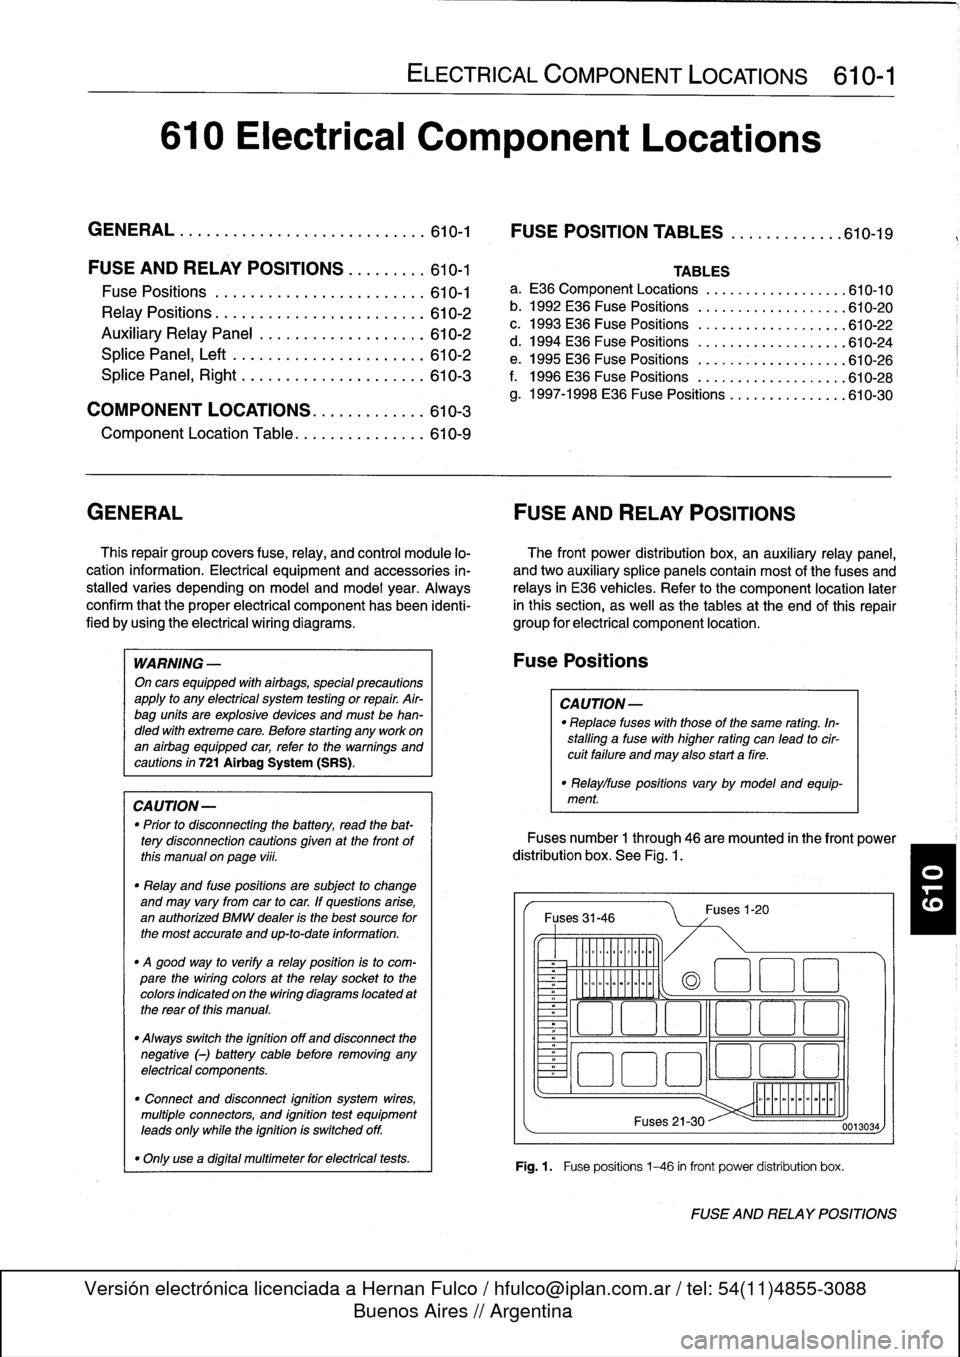 BMW 328i 1997 E36 Workshop Manual 
610
Electrical
Component
Locations

GENERAL
...........
.
.
.
.
.
.
.
.
.
........
610-1

	

FOSE
POSITION
TABLES
..
.
.
.
.
.
.....
.
610-19

FUSE
AND
RELAY
POSITIONS
.
...
.
.
.
.
.
610-1

Fuse
Pos